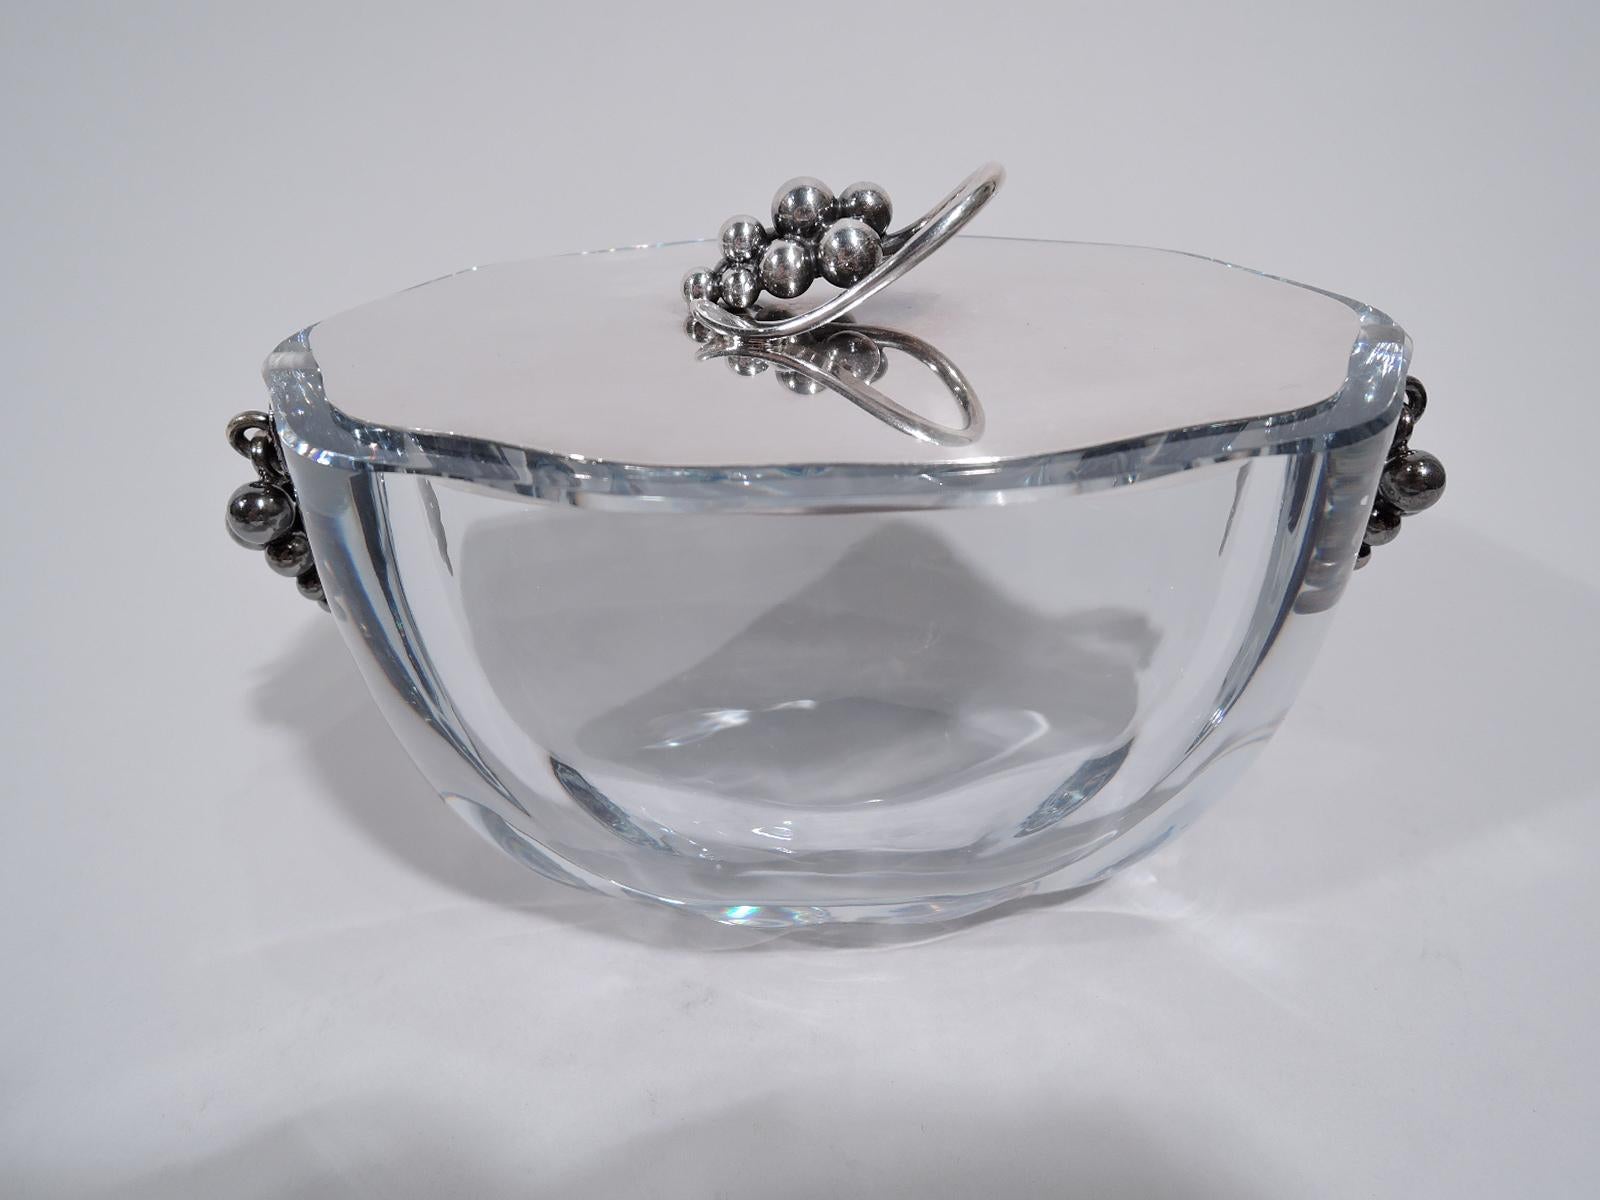 Mid-Century Modern jar. Made by E. Dragsted in Denmark. Thick and ovoid clear glass bowl with sterling silver grape bunches loose-mounted to ends. Flat sterling silver cover with grape bunch finial. Beautiful Jensen-inspired design. Cover fully